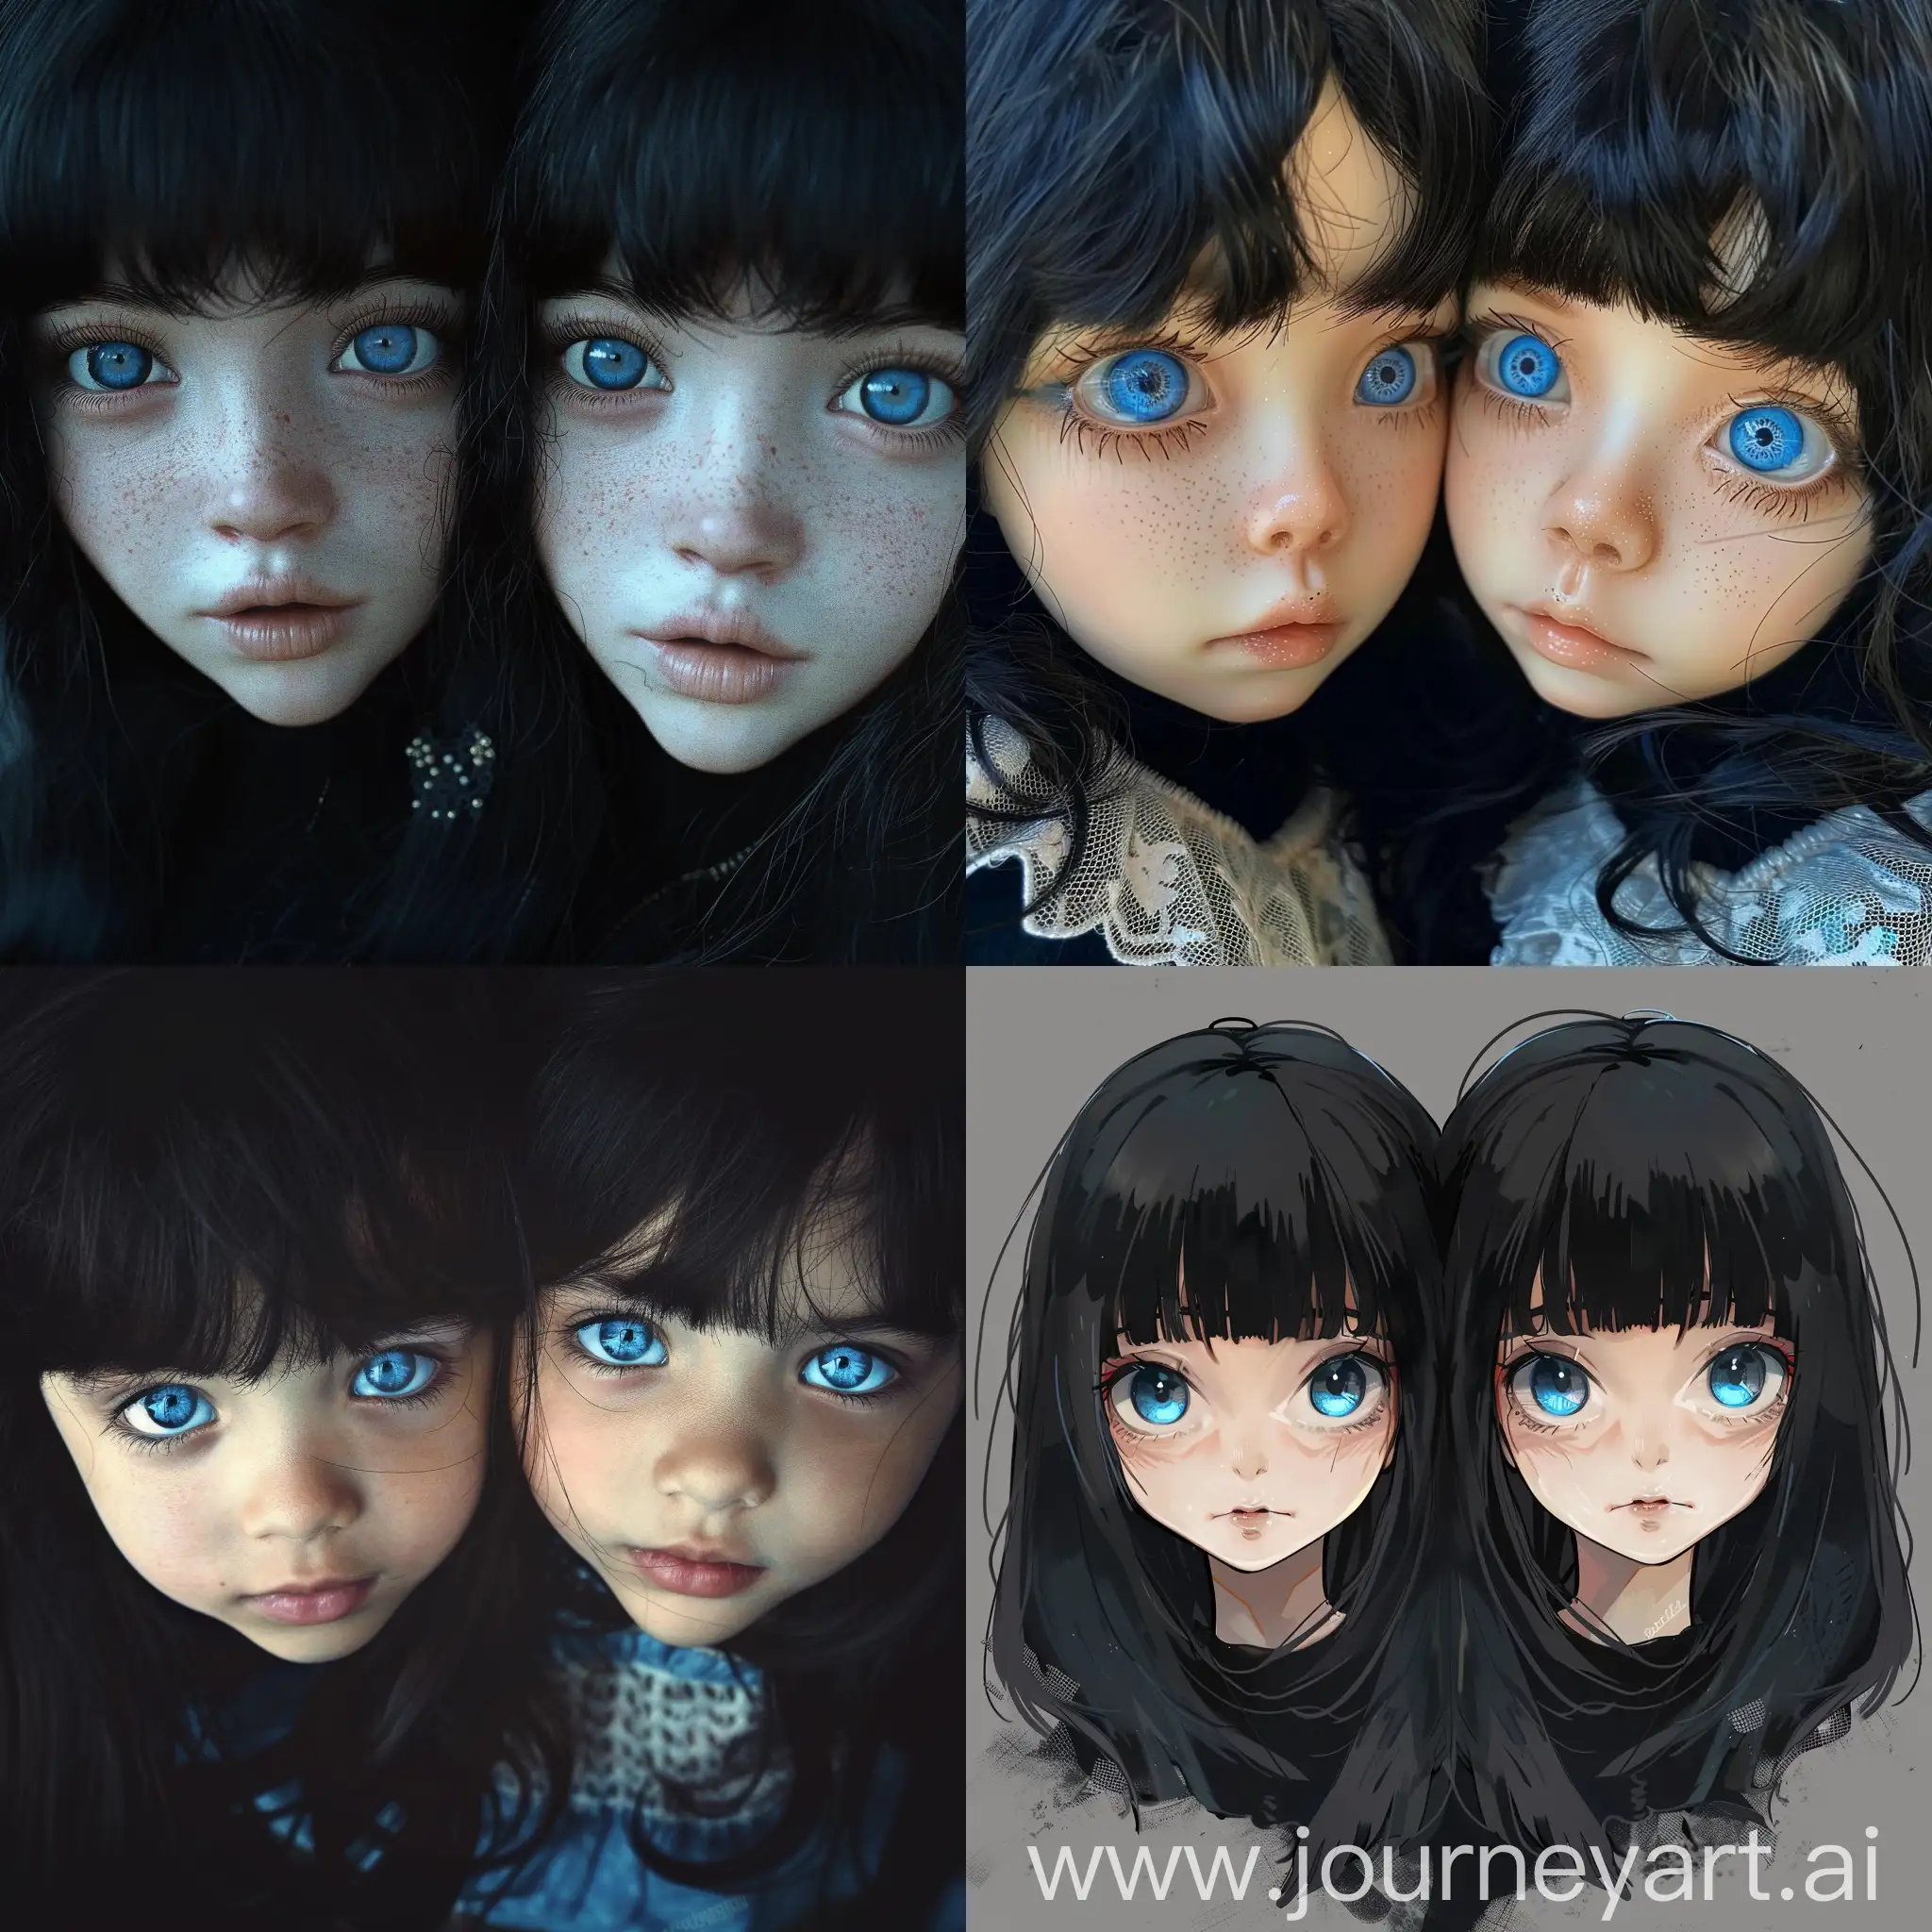 Identical-Twin-Sisters-with-Black-Hair-and-Blue-Eyes